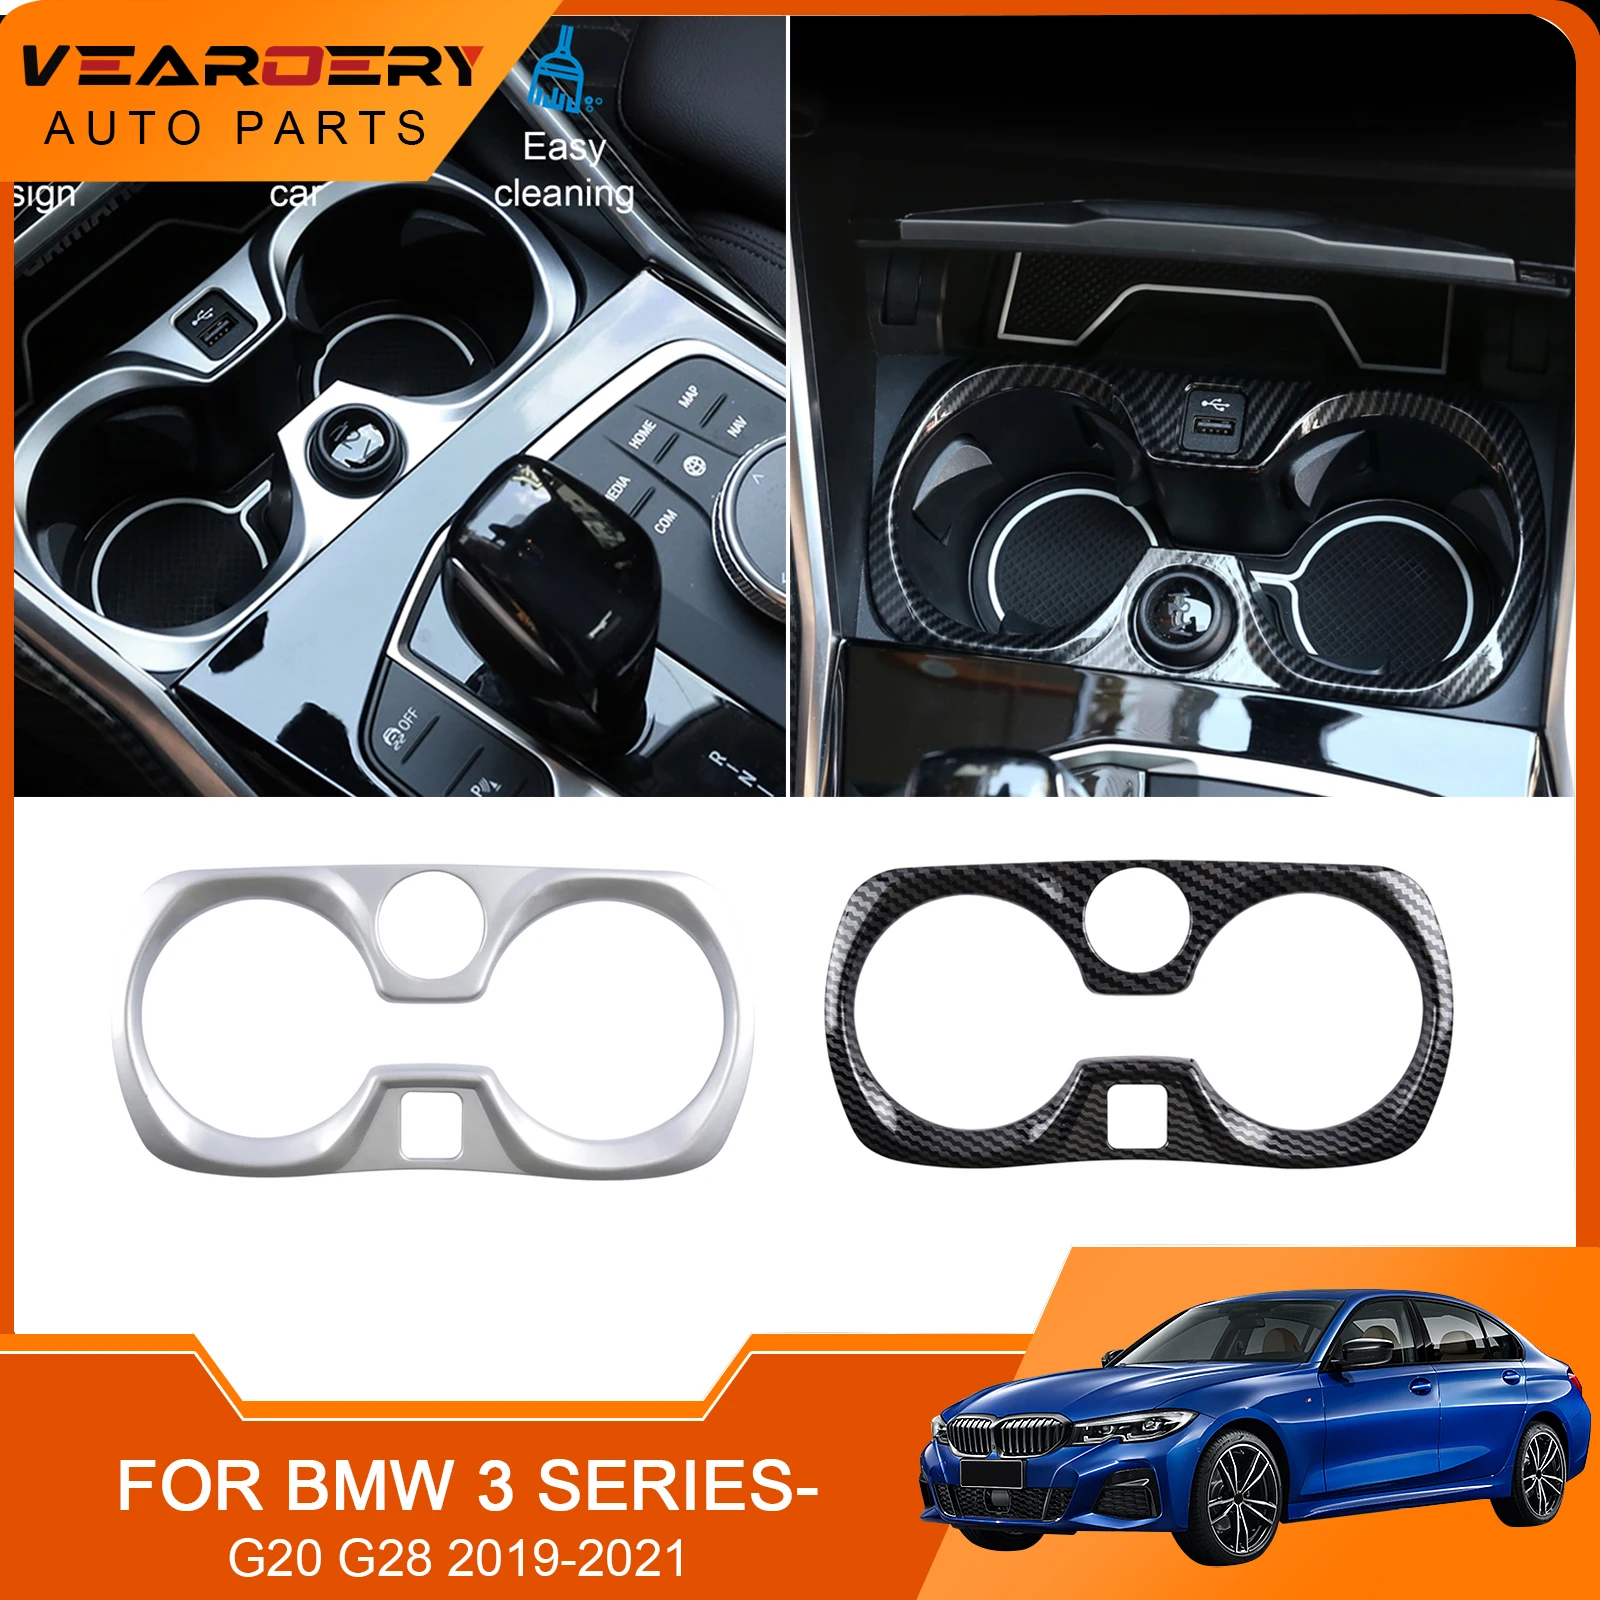 

For BMW 3 Series G20 G28 2019 2020 2021 ABS Carbon Fiber Style Central Gear Shift Panel Water Cup Holder Frame Protective Trim